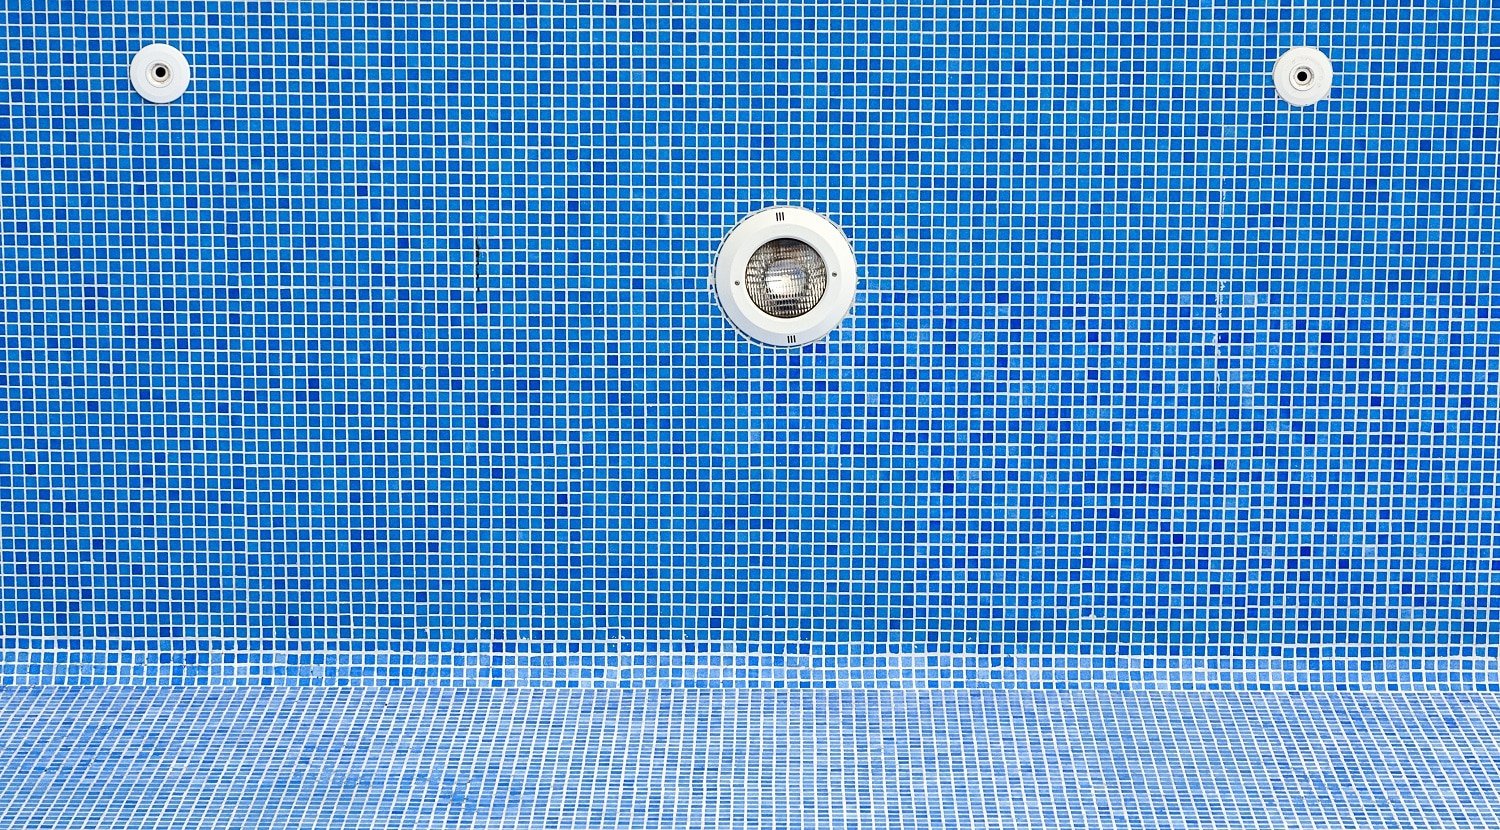 An empty swimming pool with blue tiles